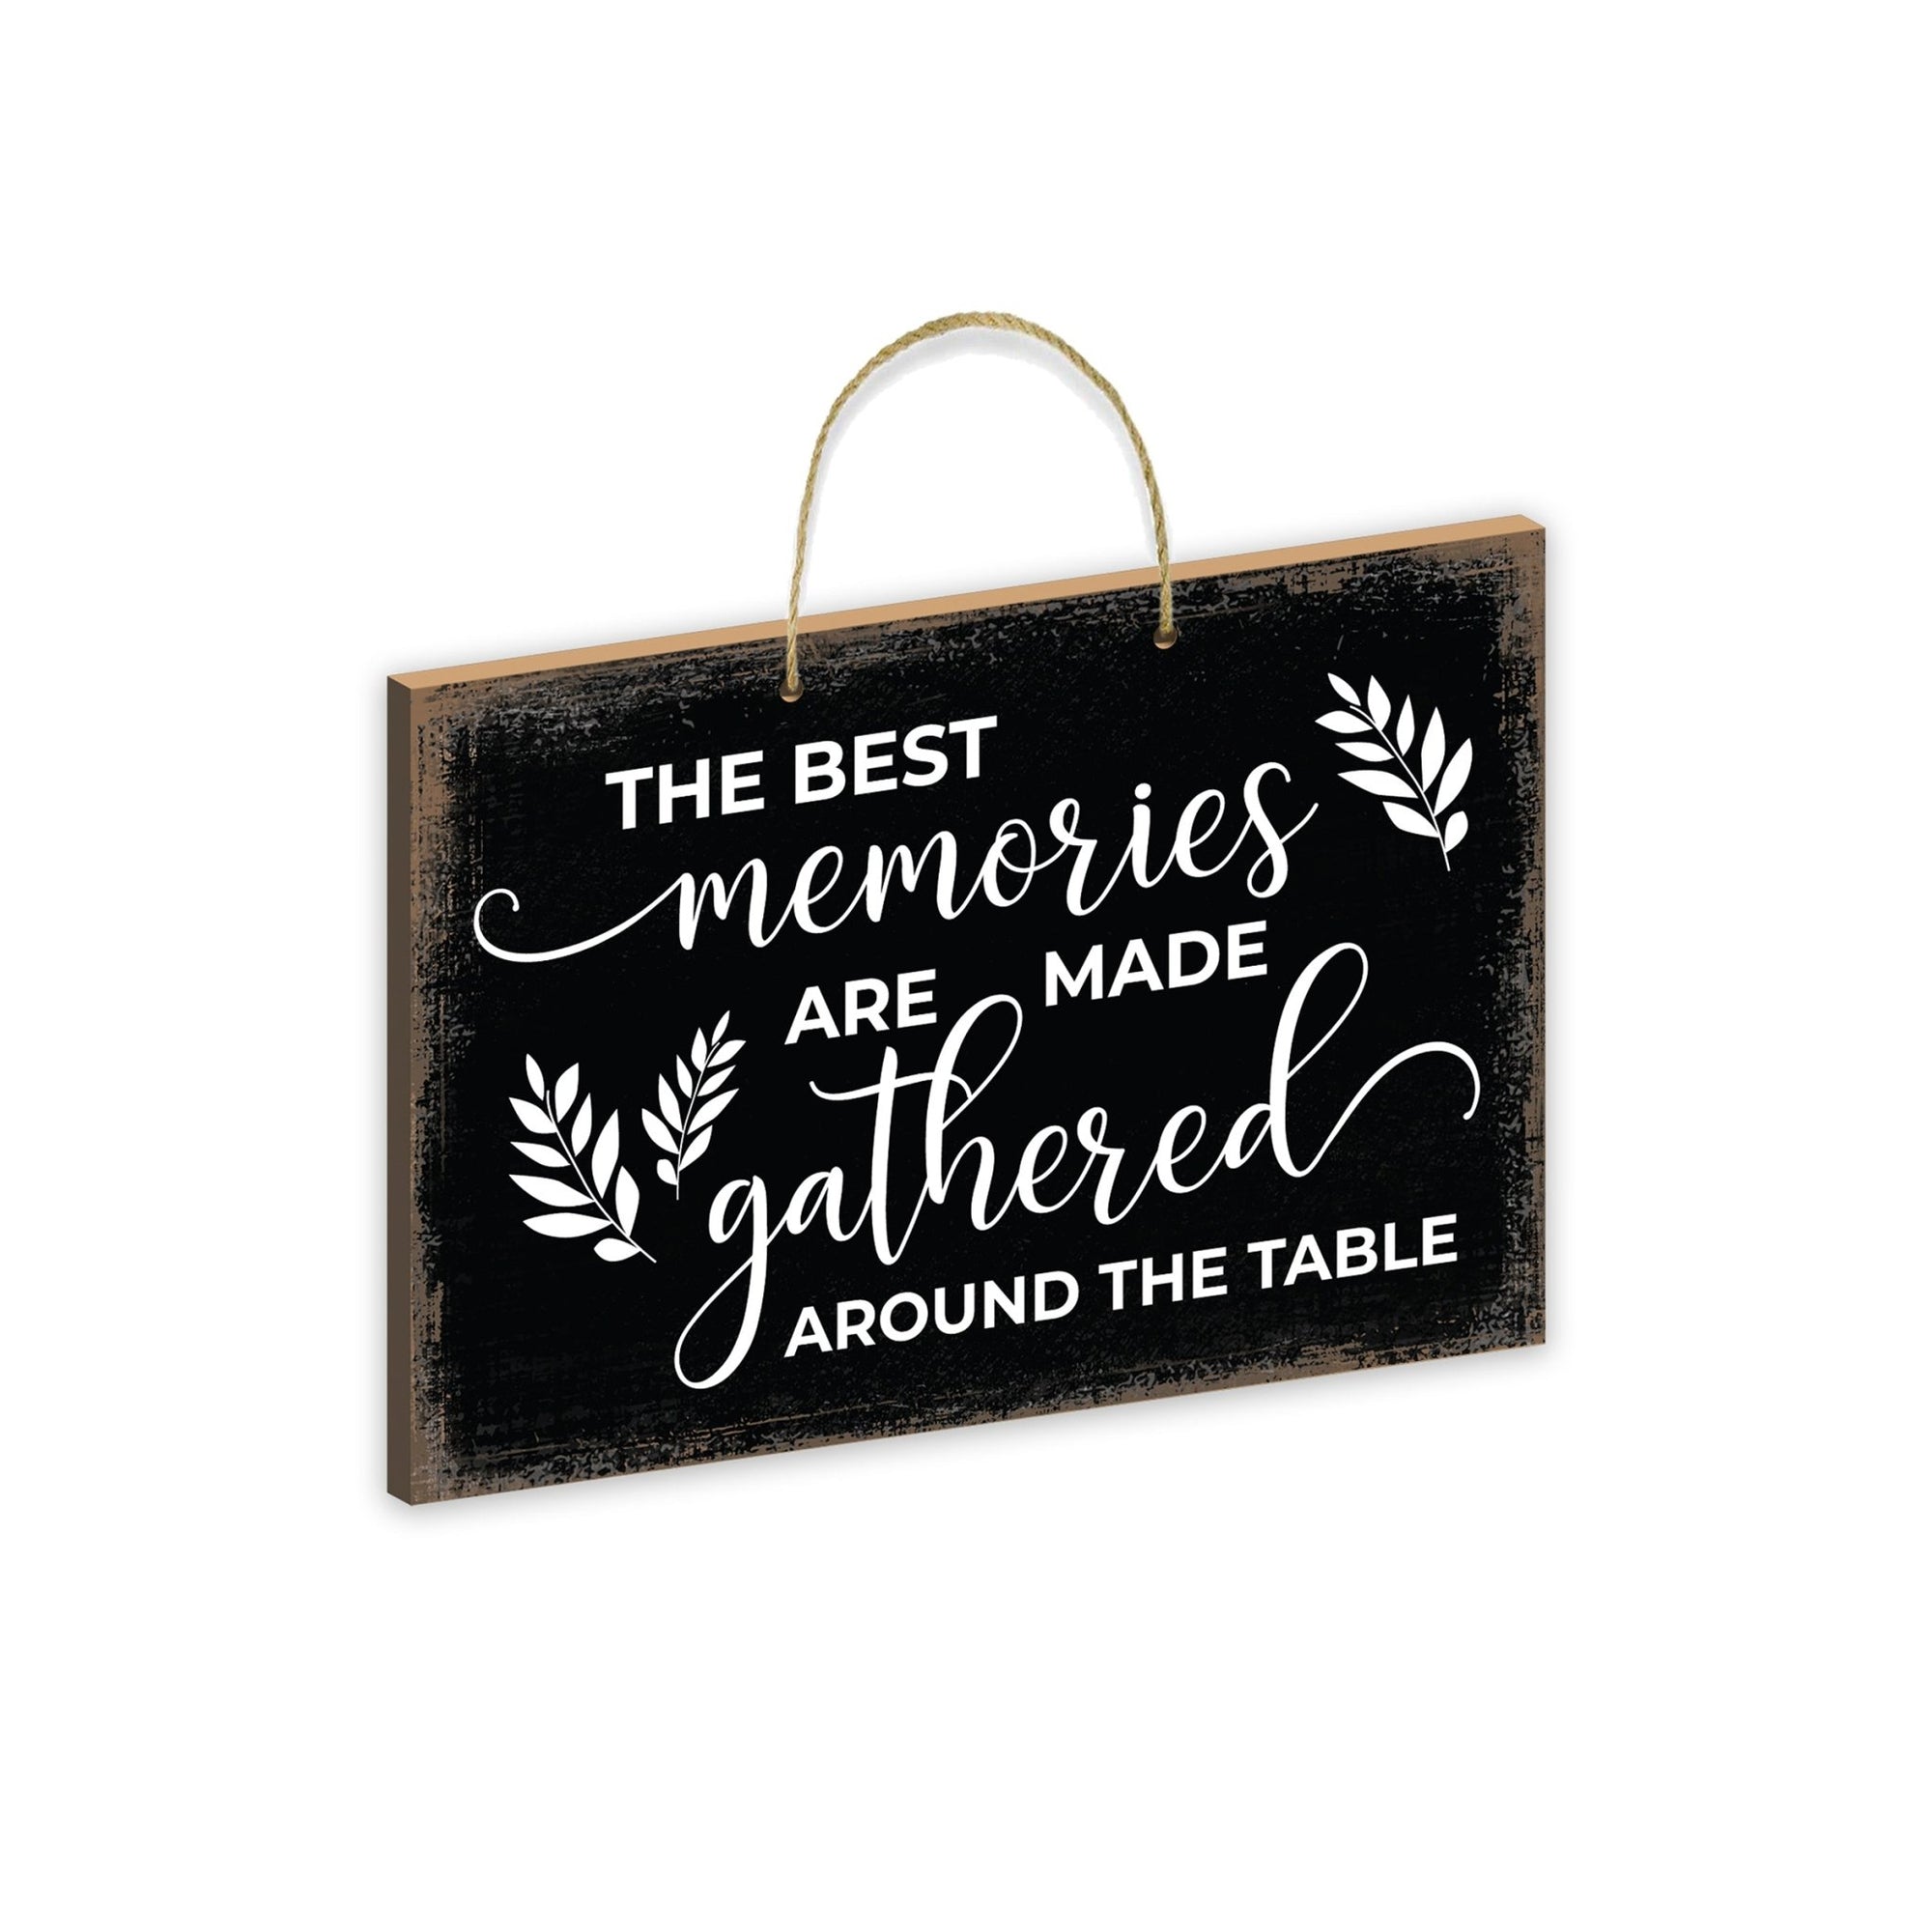 Inspirational Wooden Rustic Wall Hanging Rope Sign Kitchen Home Décor - The Best Memories - LifeSong Milestones